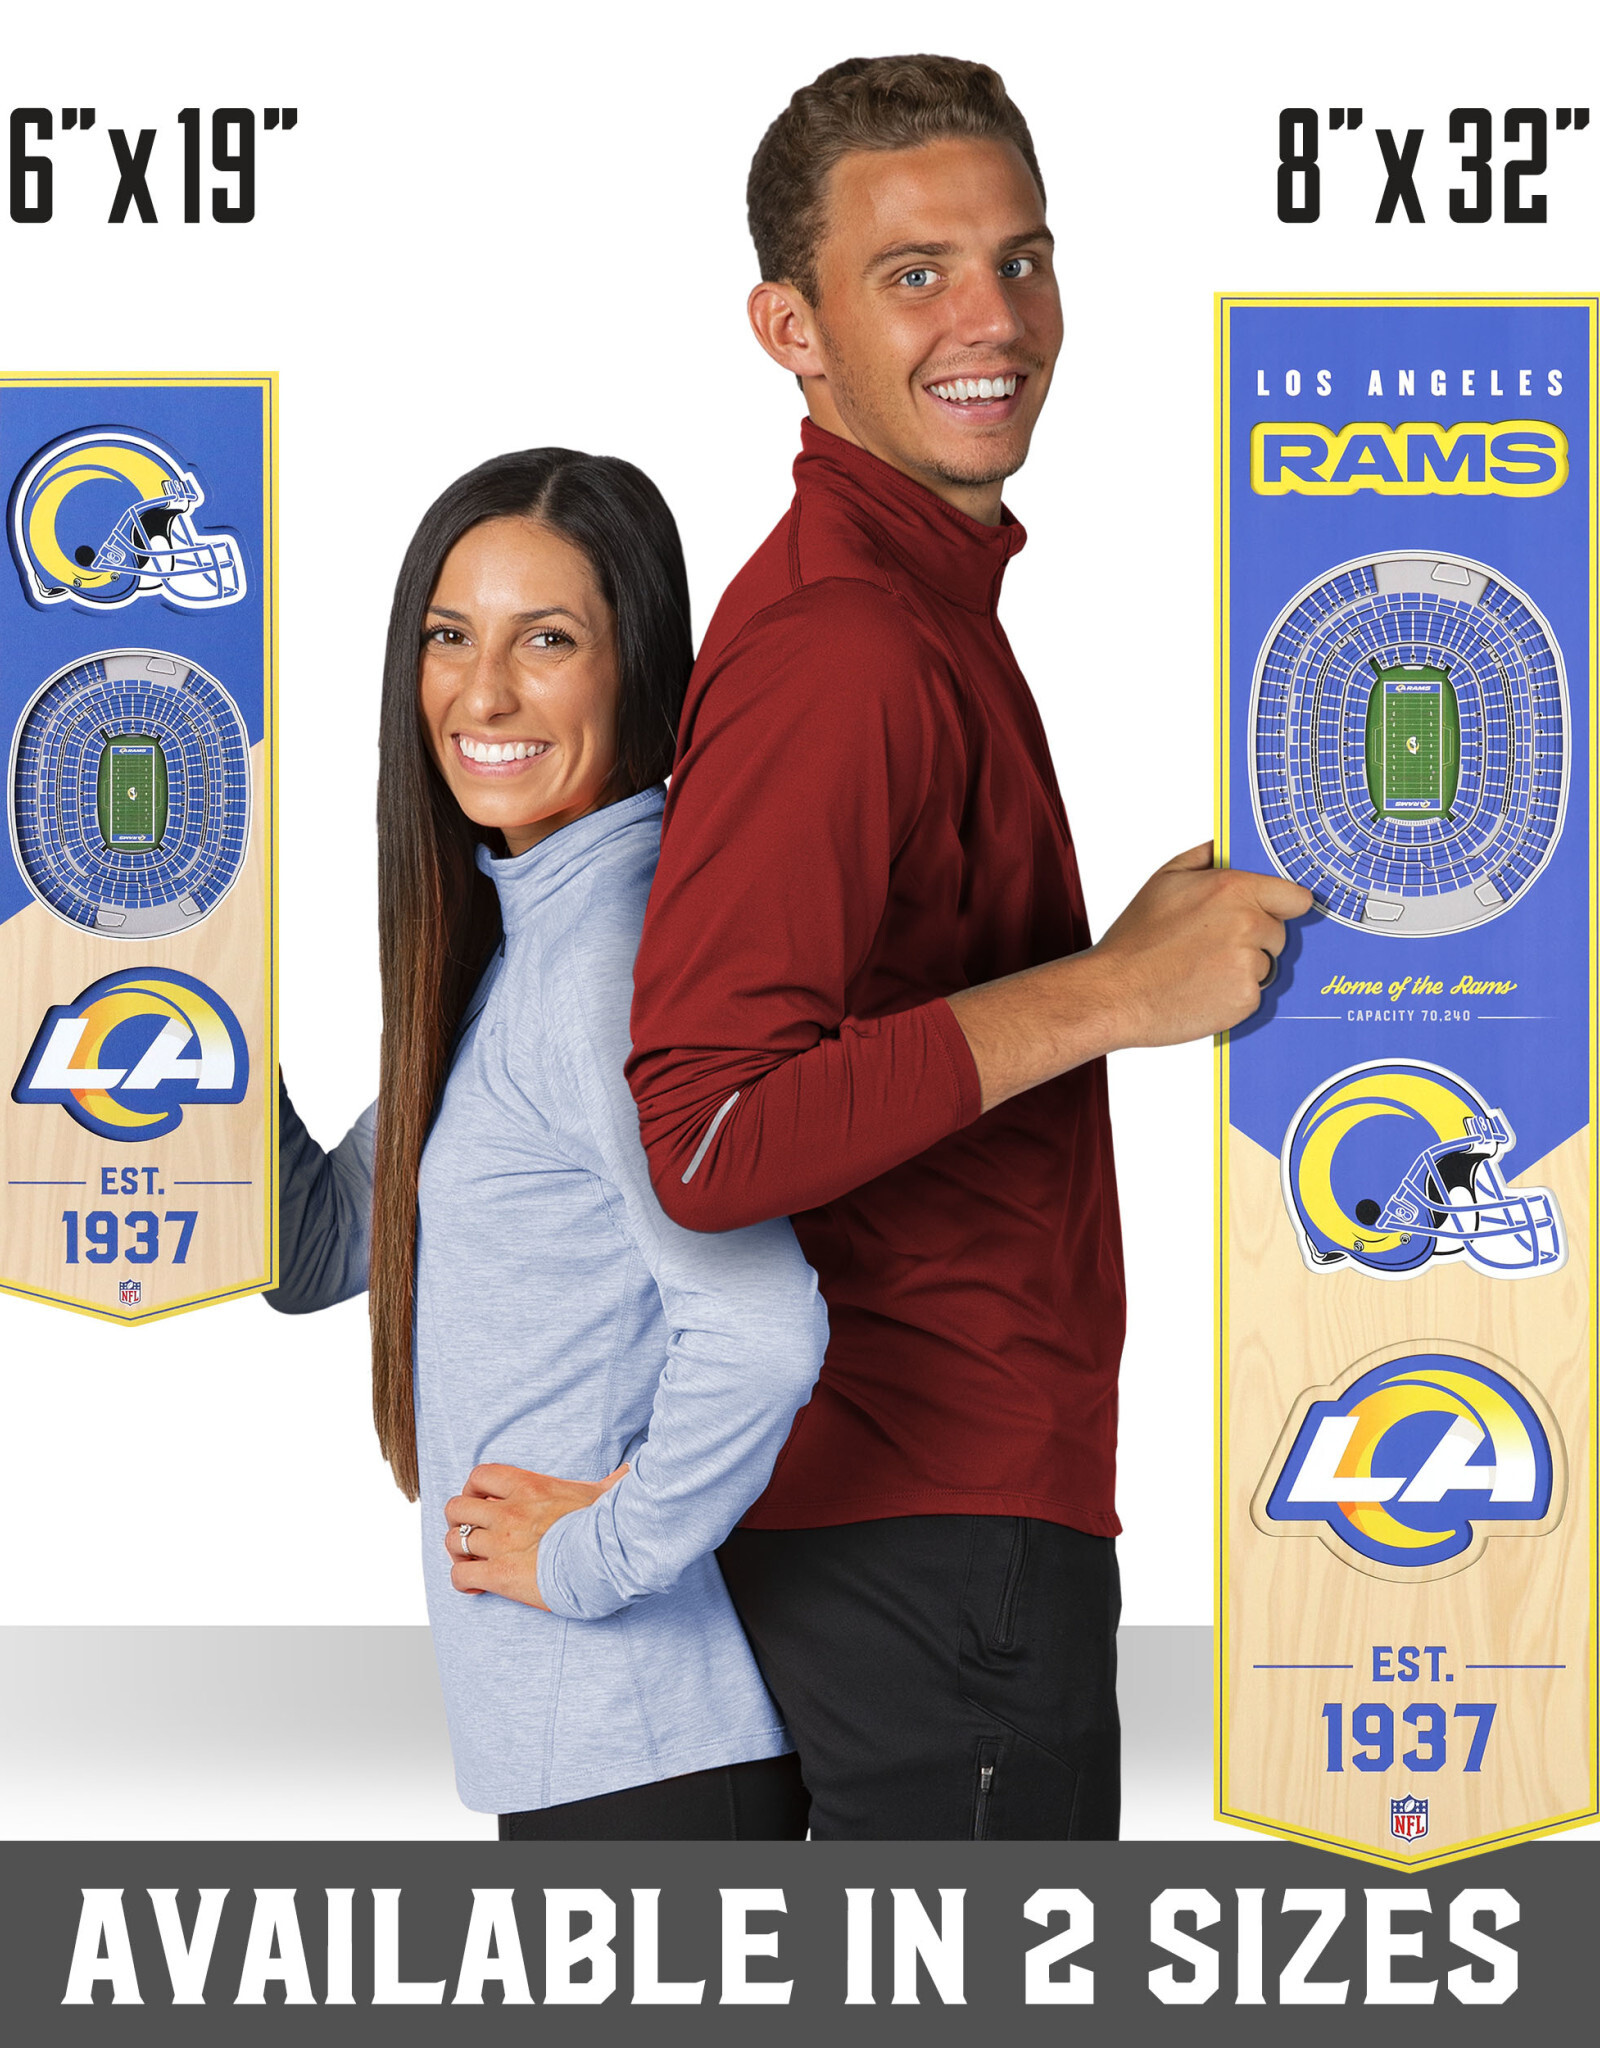 YOU THE FAN Los Angeles Rams 3D StadiumView 8x32 Banner